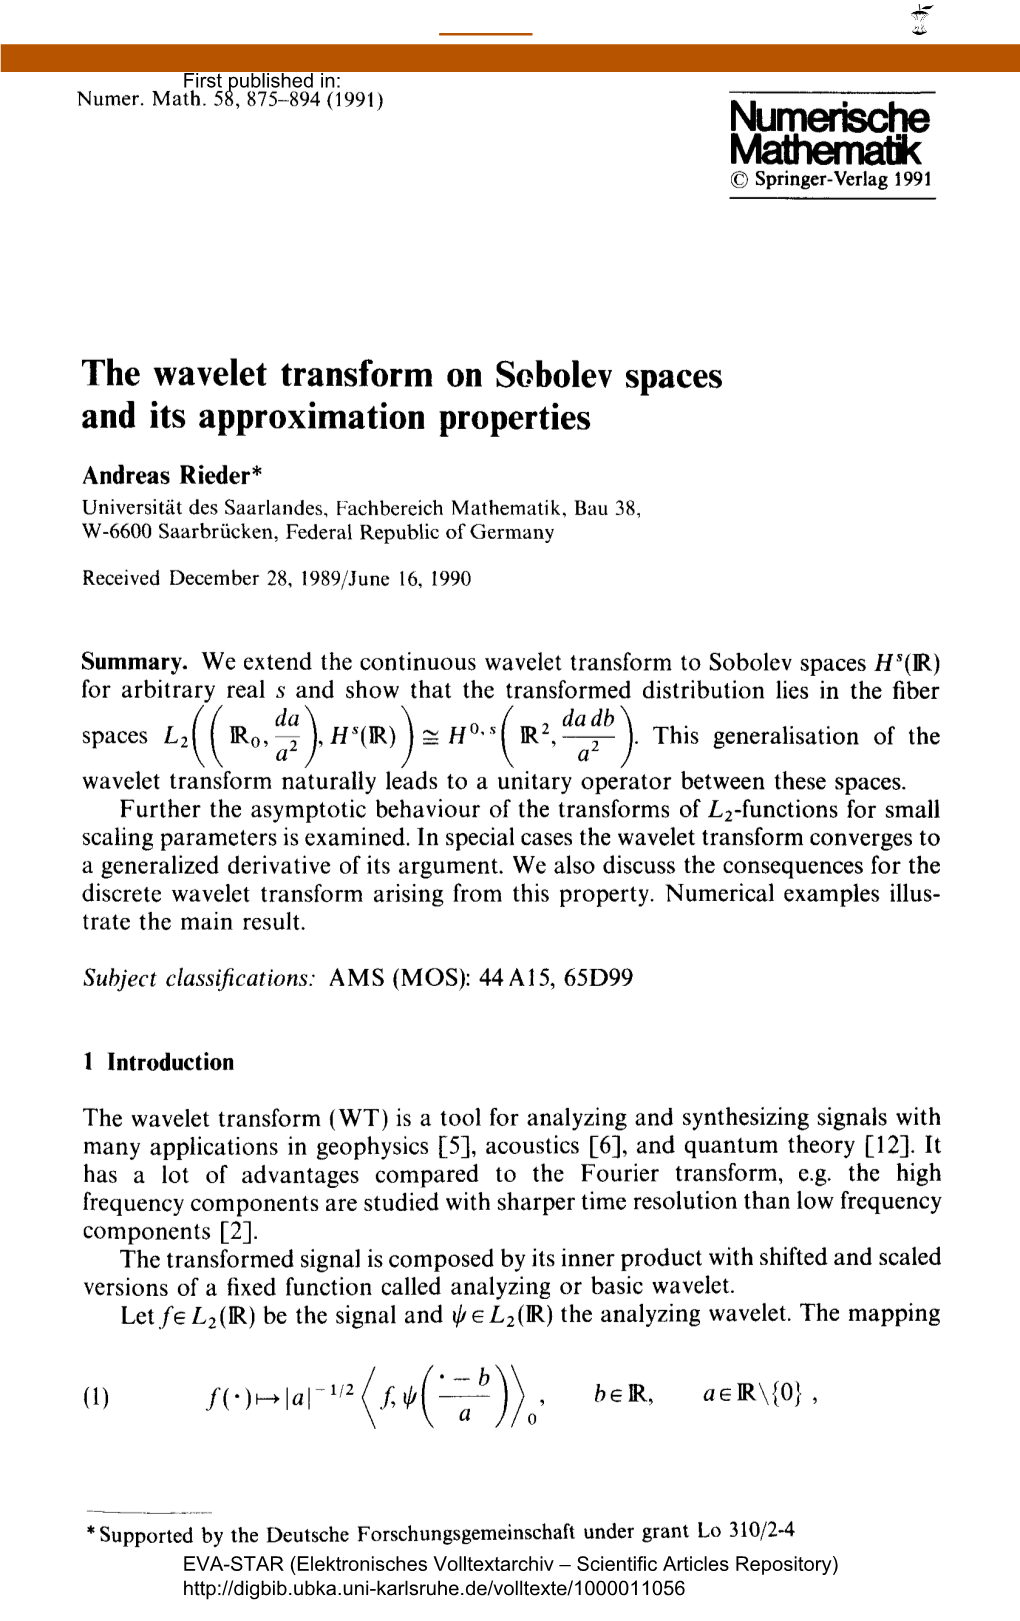 The Wavelet Transform on Sobolev Spaces and Its Approximation Properties